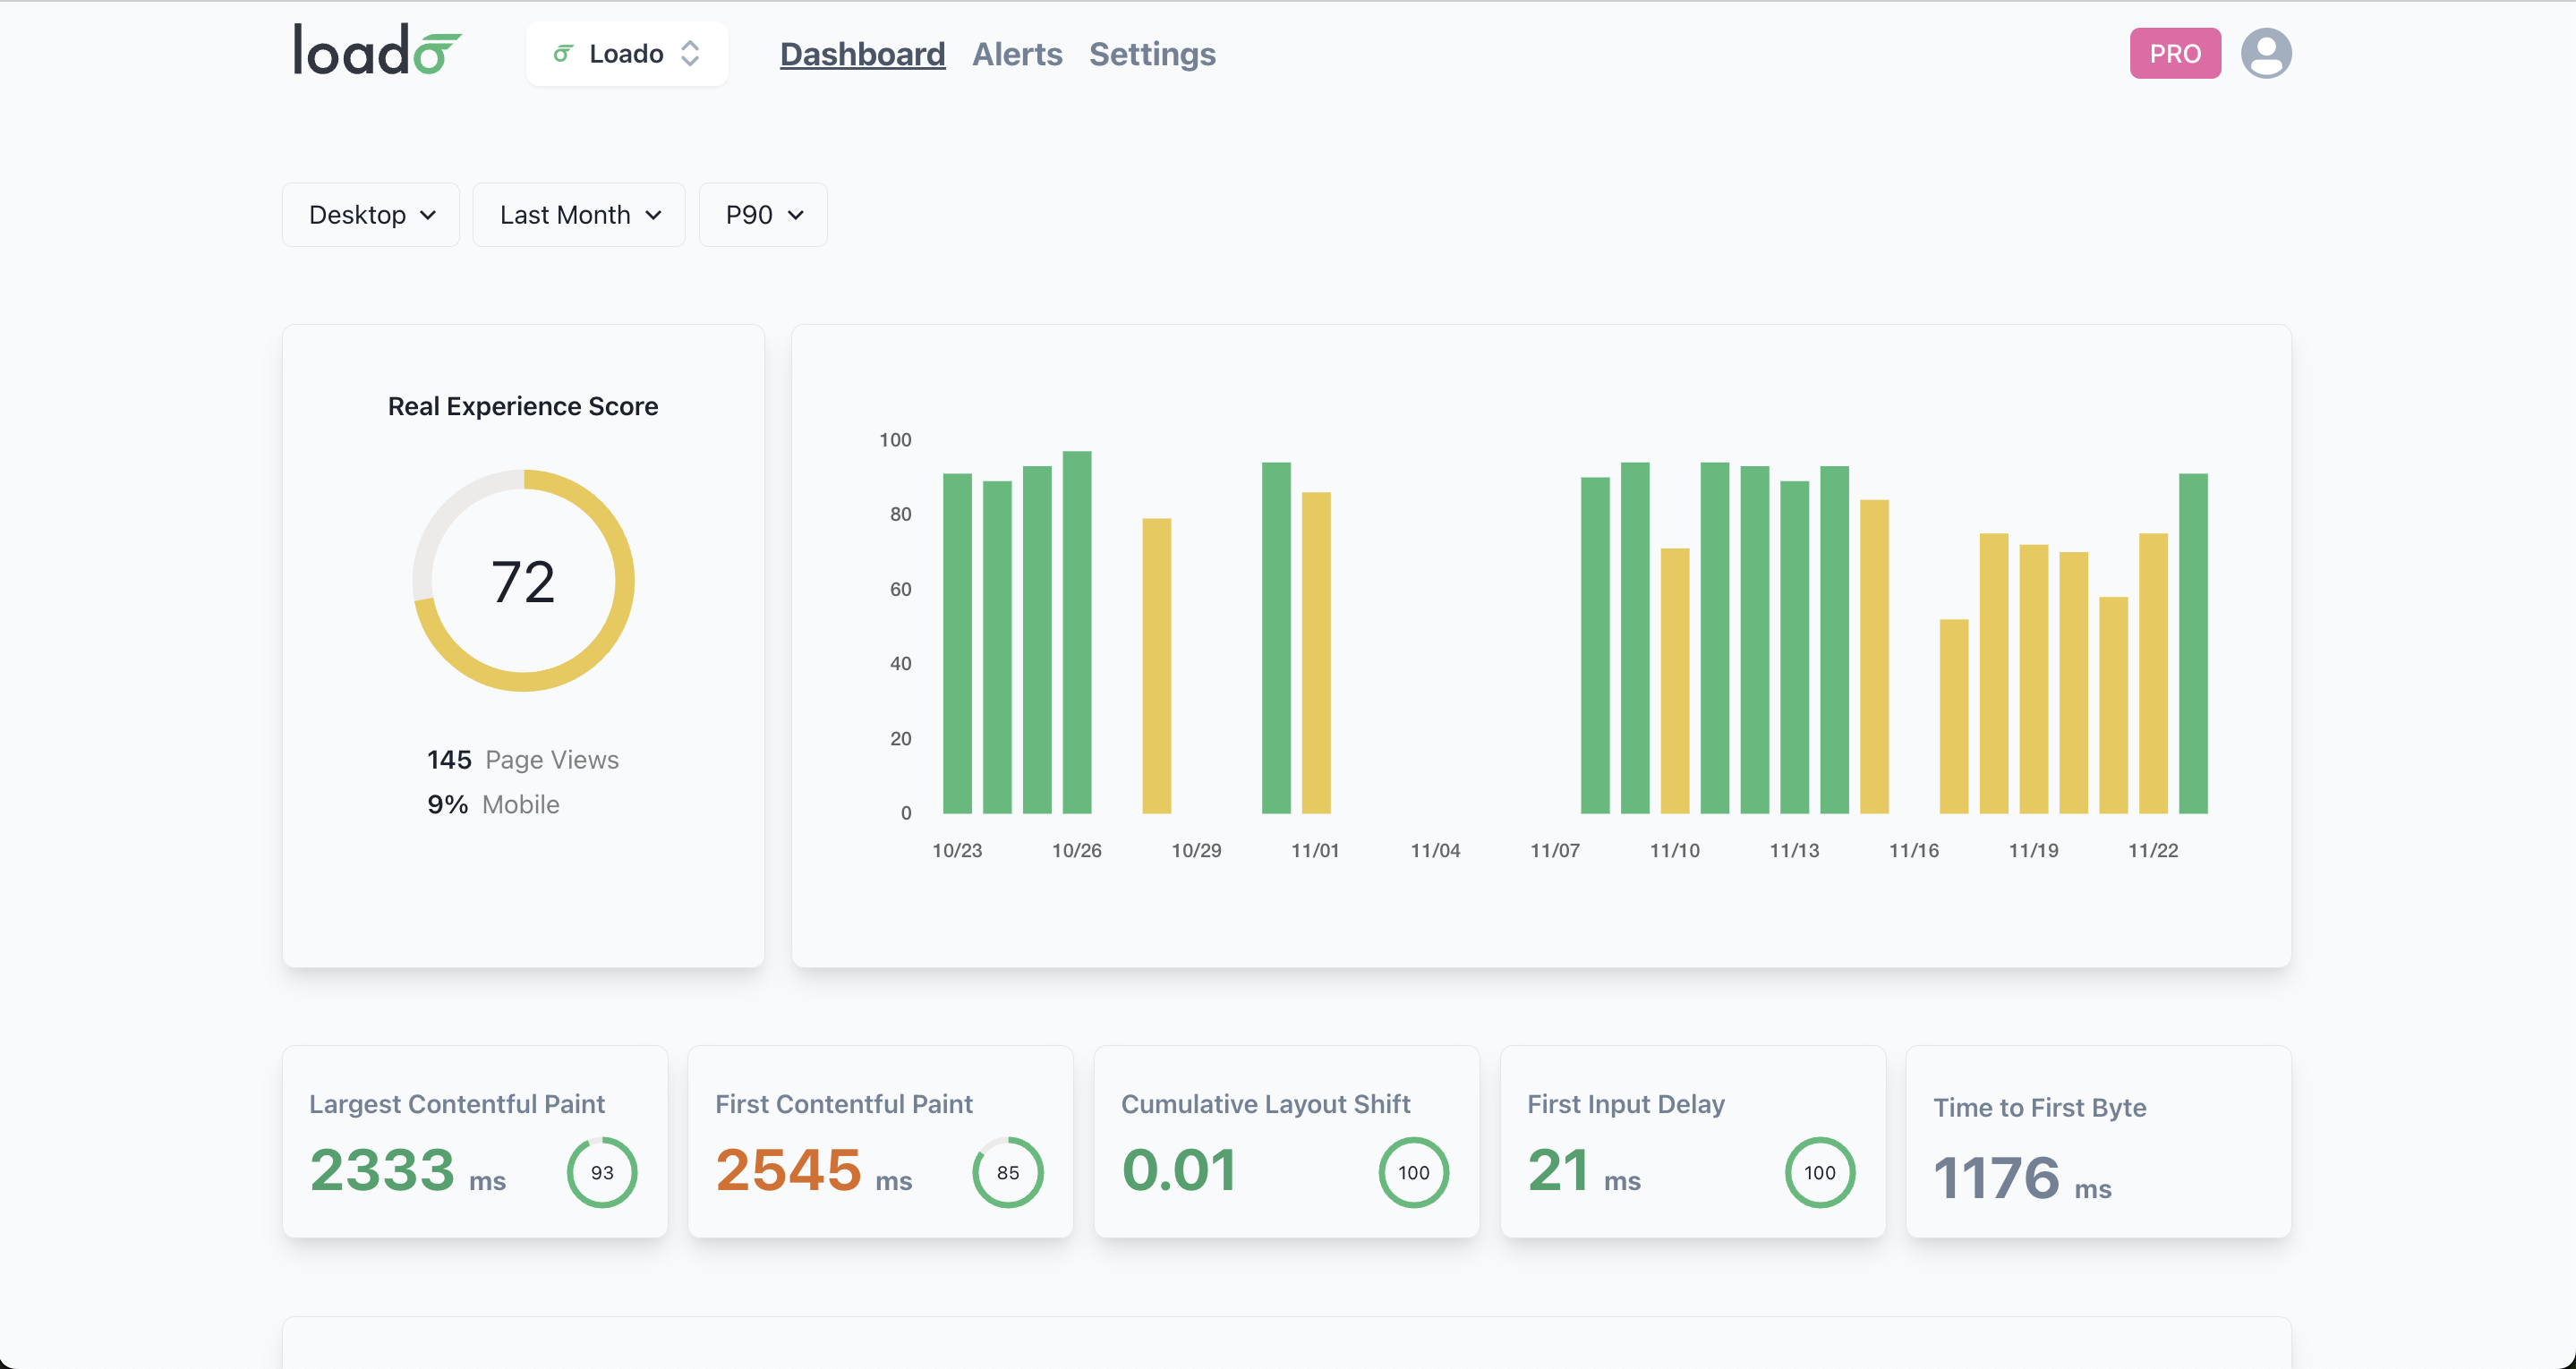 The dashboard helps to identify issues before they impact your business. The Real Experience Score is an index that summarizes all metrics in one. The index helps to identify issues before they impact your business.